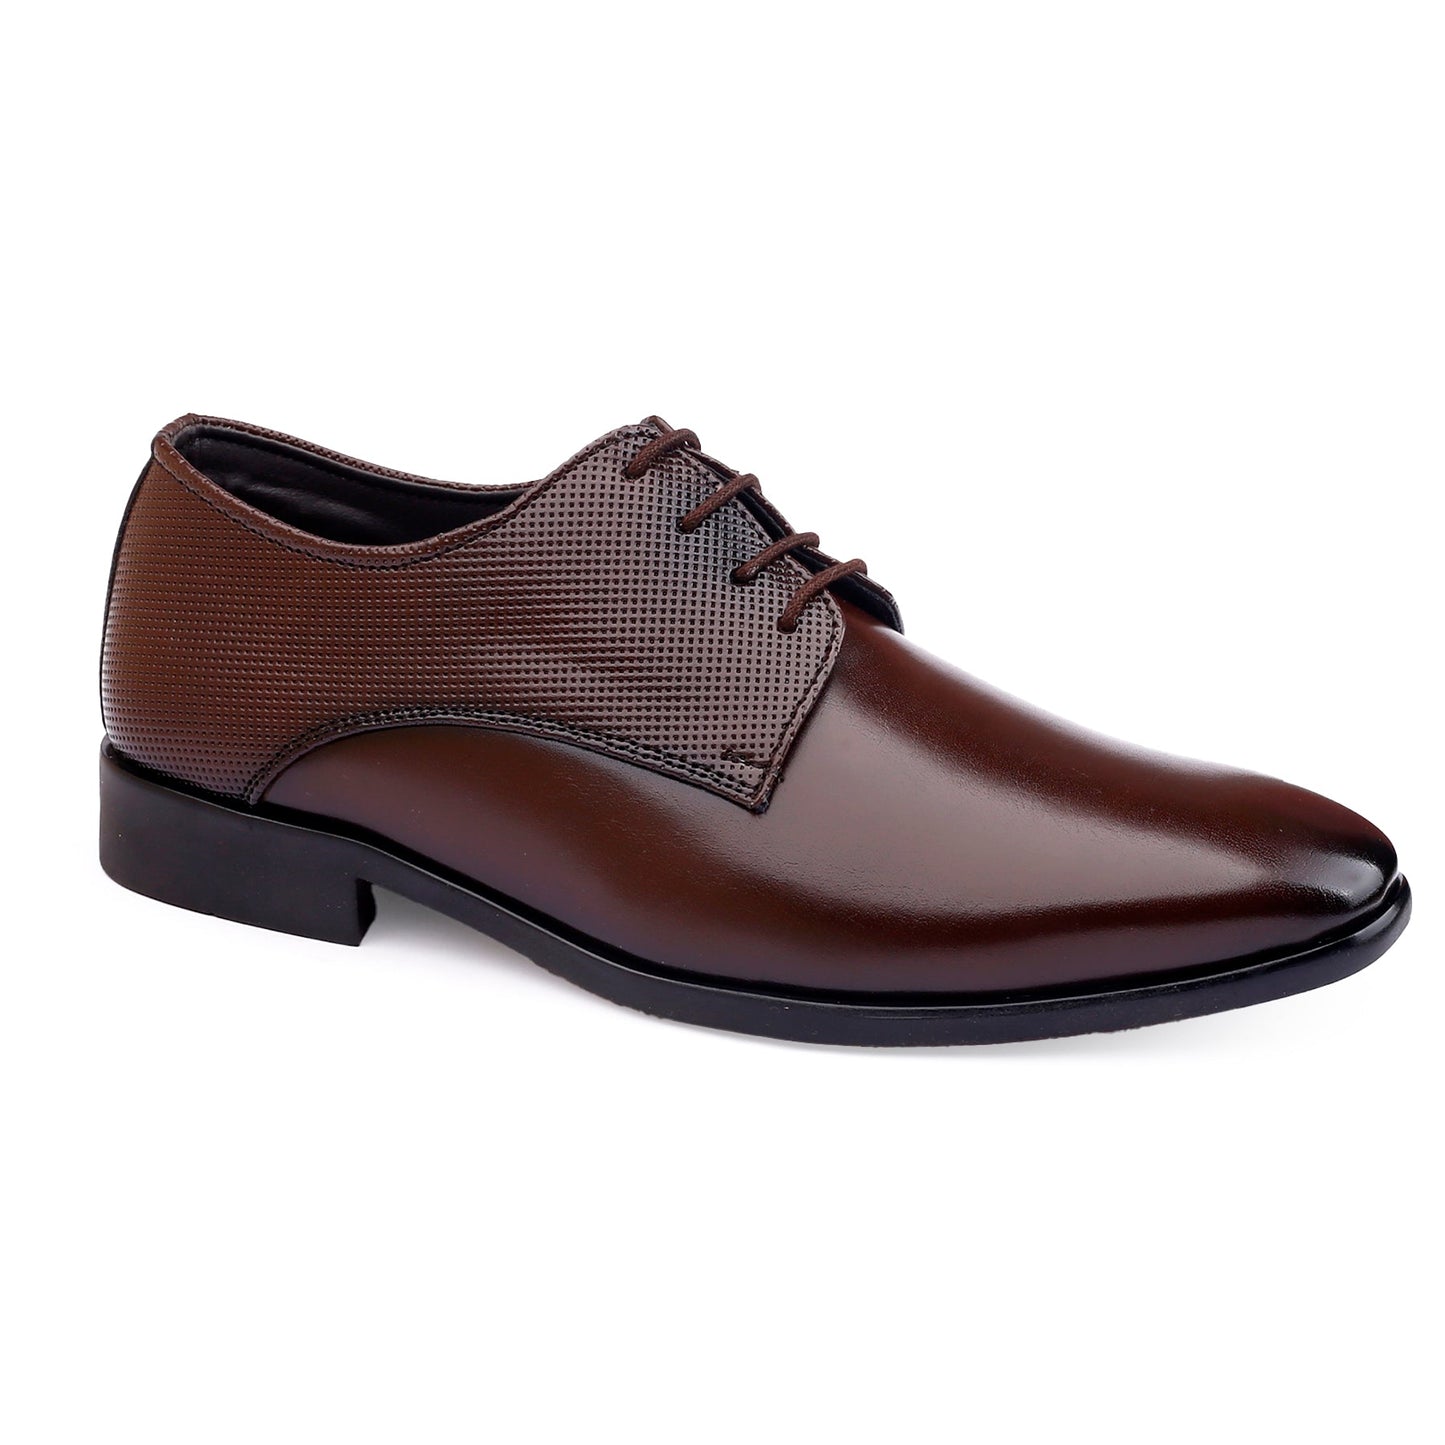 Bxxy's Faux Leather Work wear Lace-up Formal Shoes for Men